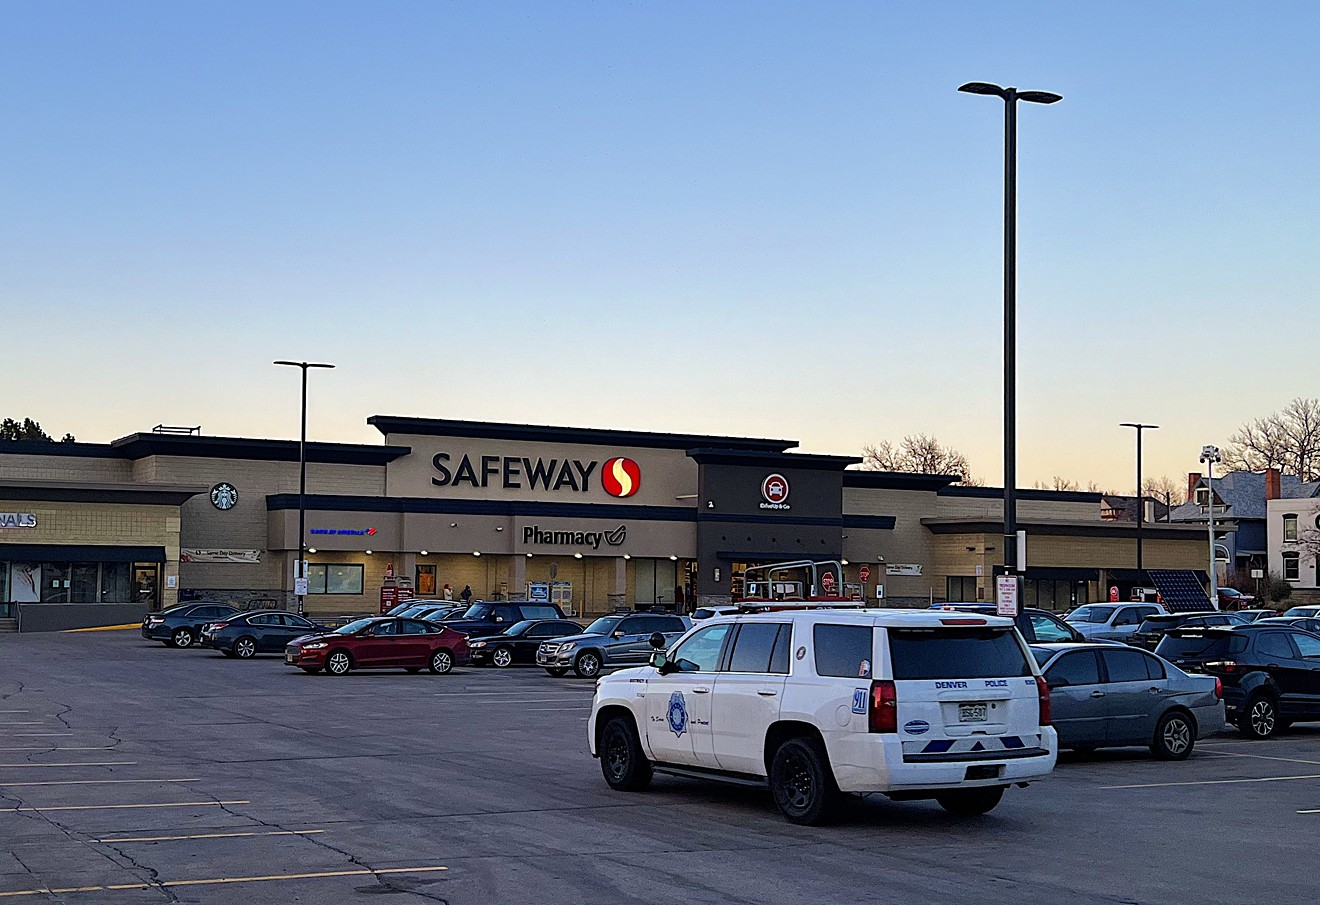 Denver's infamous "unsafeway" was crowned the fifth worst grocery store in the U.S. by a new ranking.